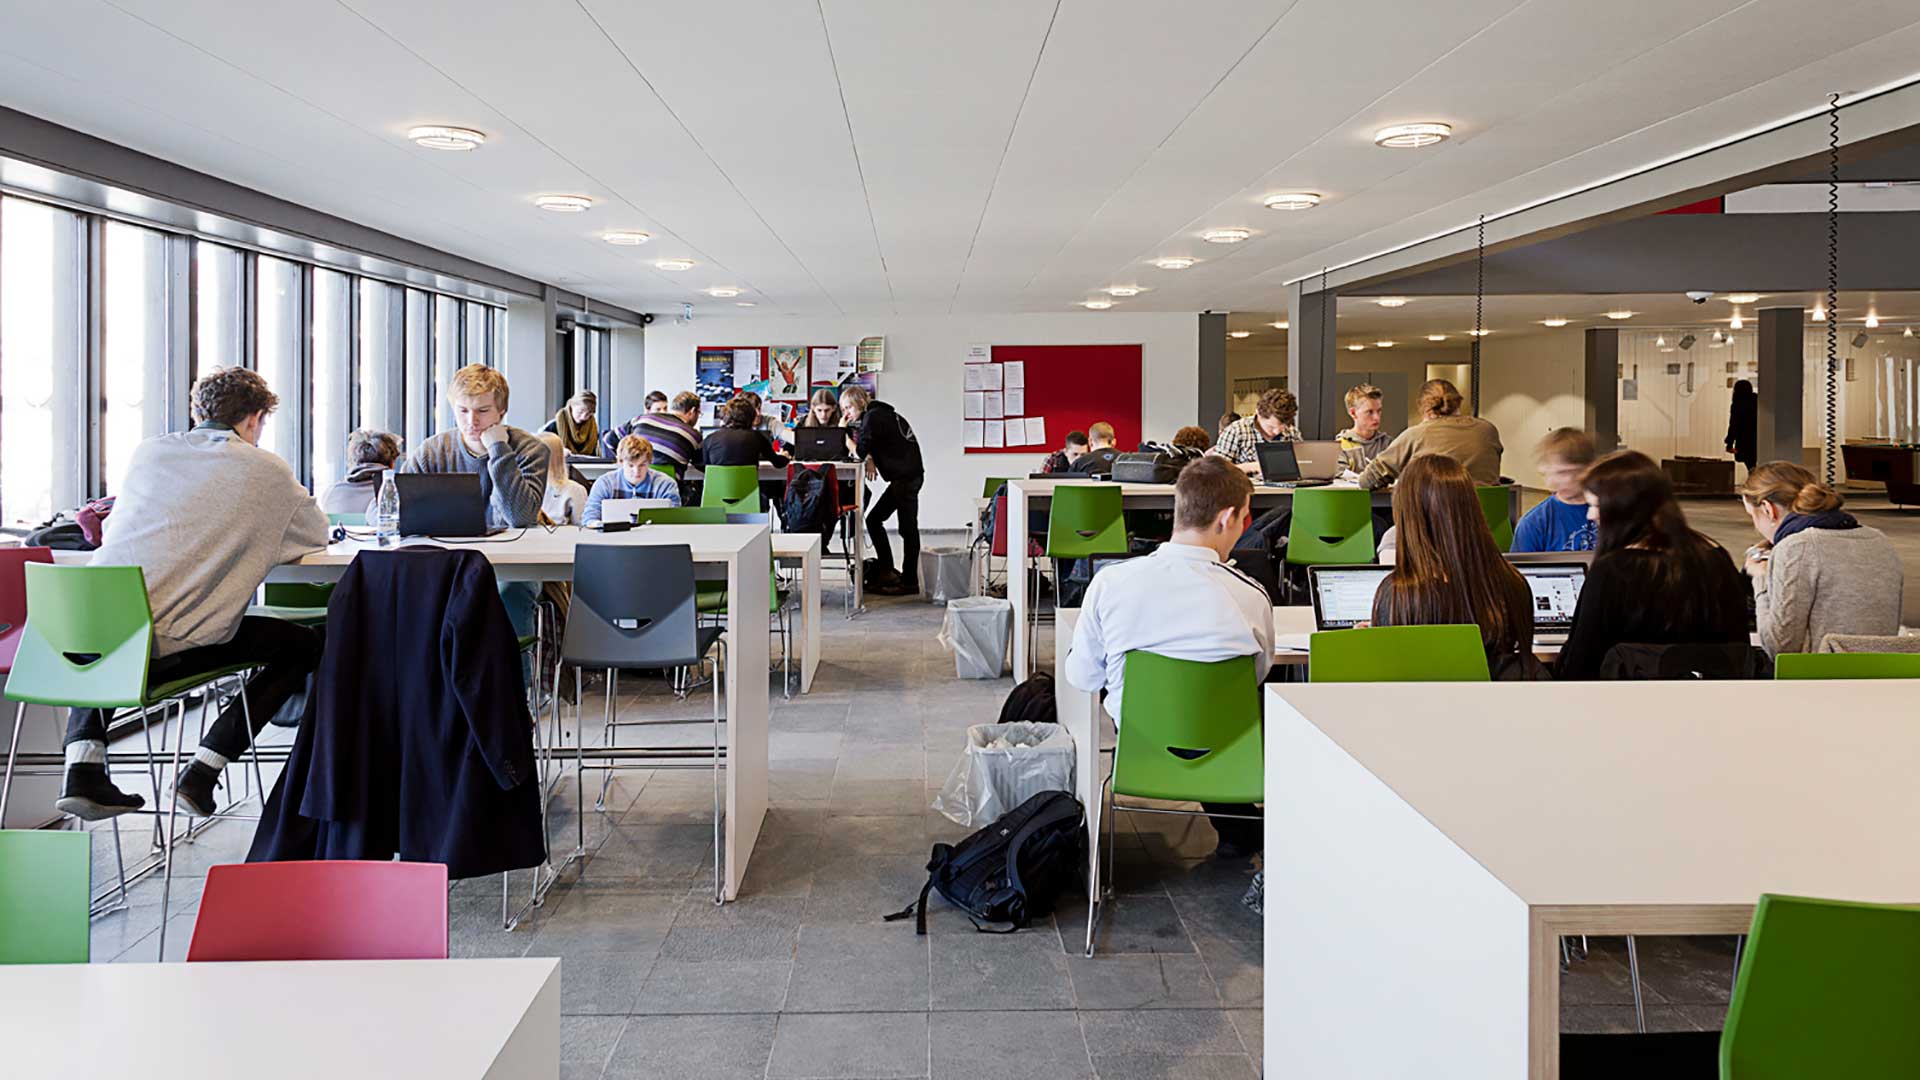 The study environment at DTU is informal, and the open discussions between students and professors make for a very exciting and dynamic learning experience.